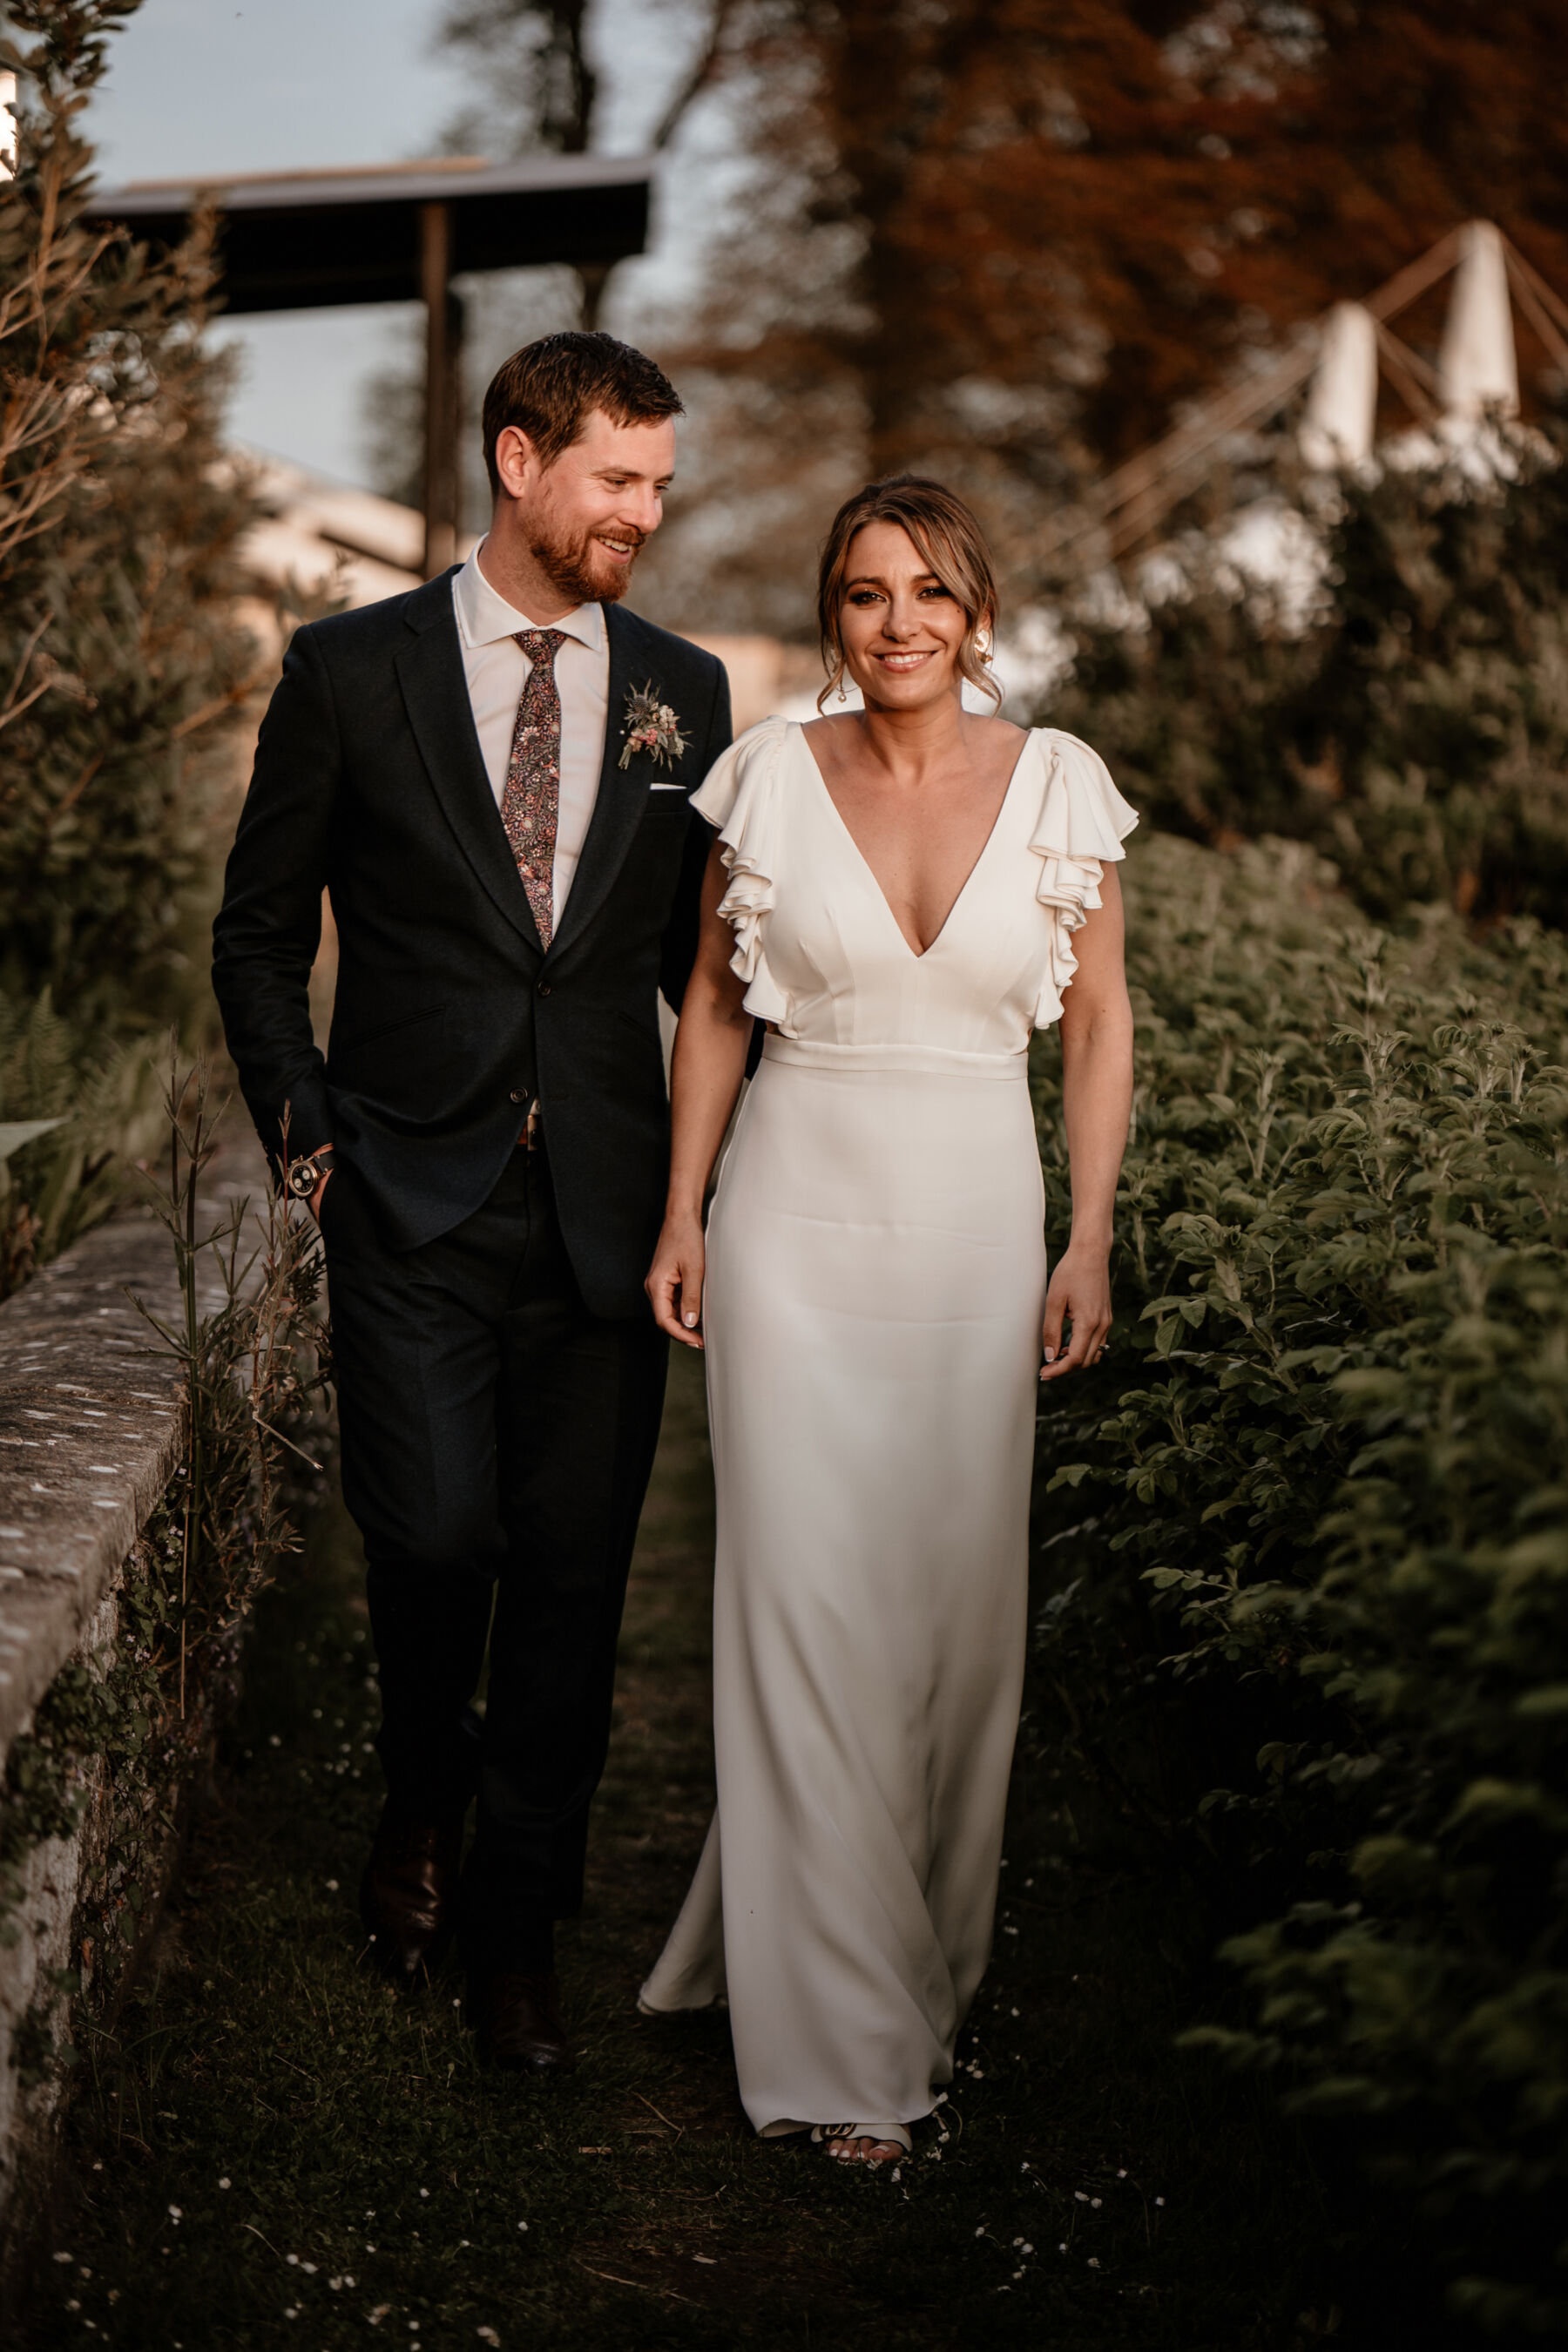 Bride with an Alexander Grecco wedding dress with ruffled sleeves